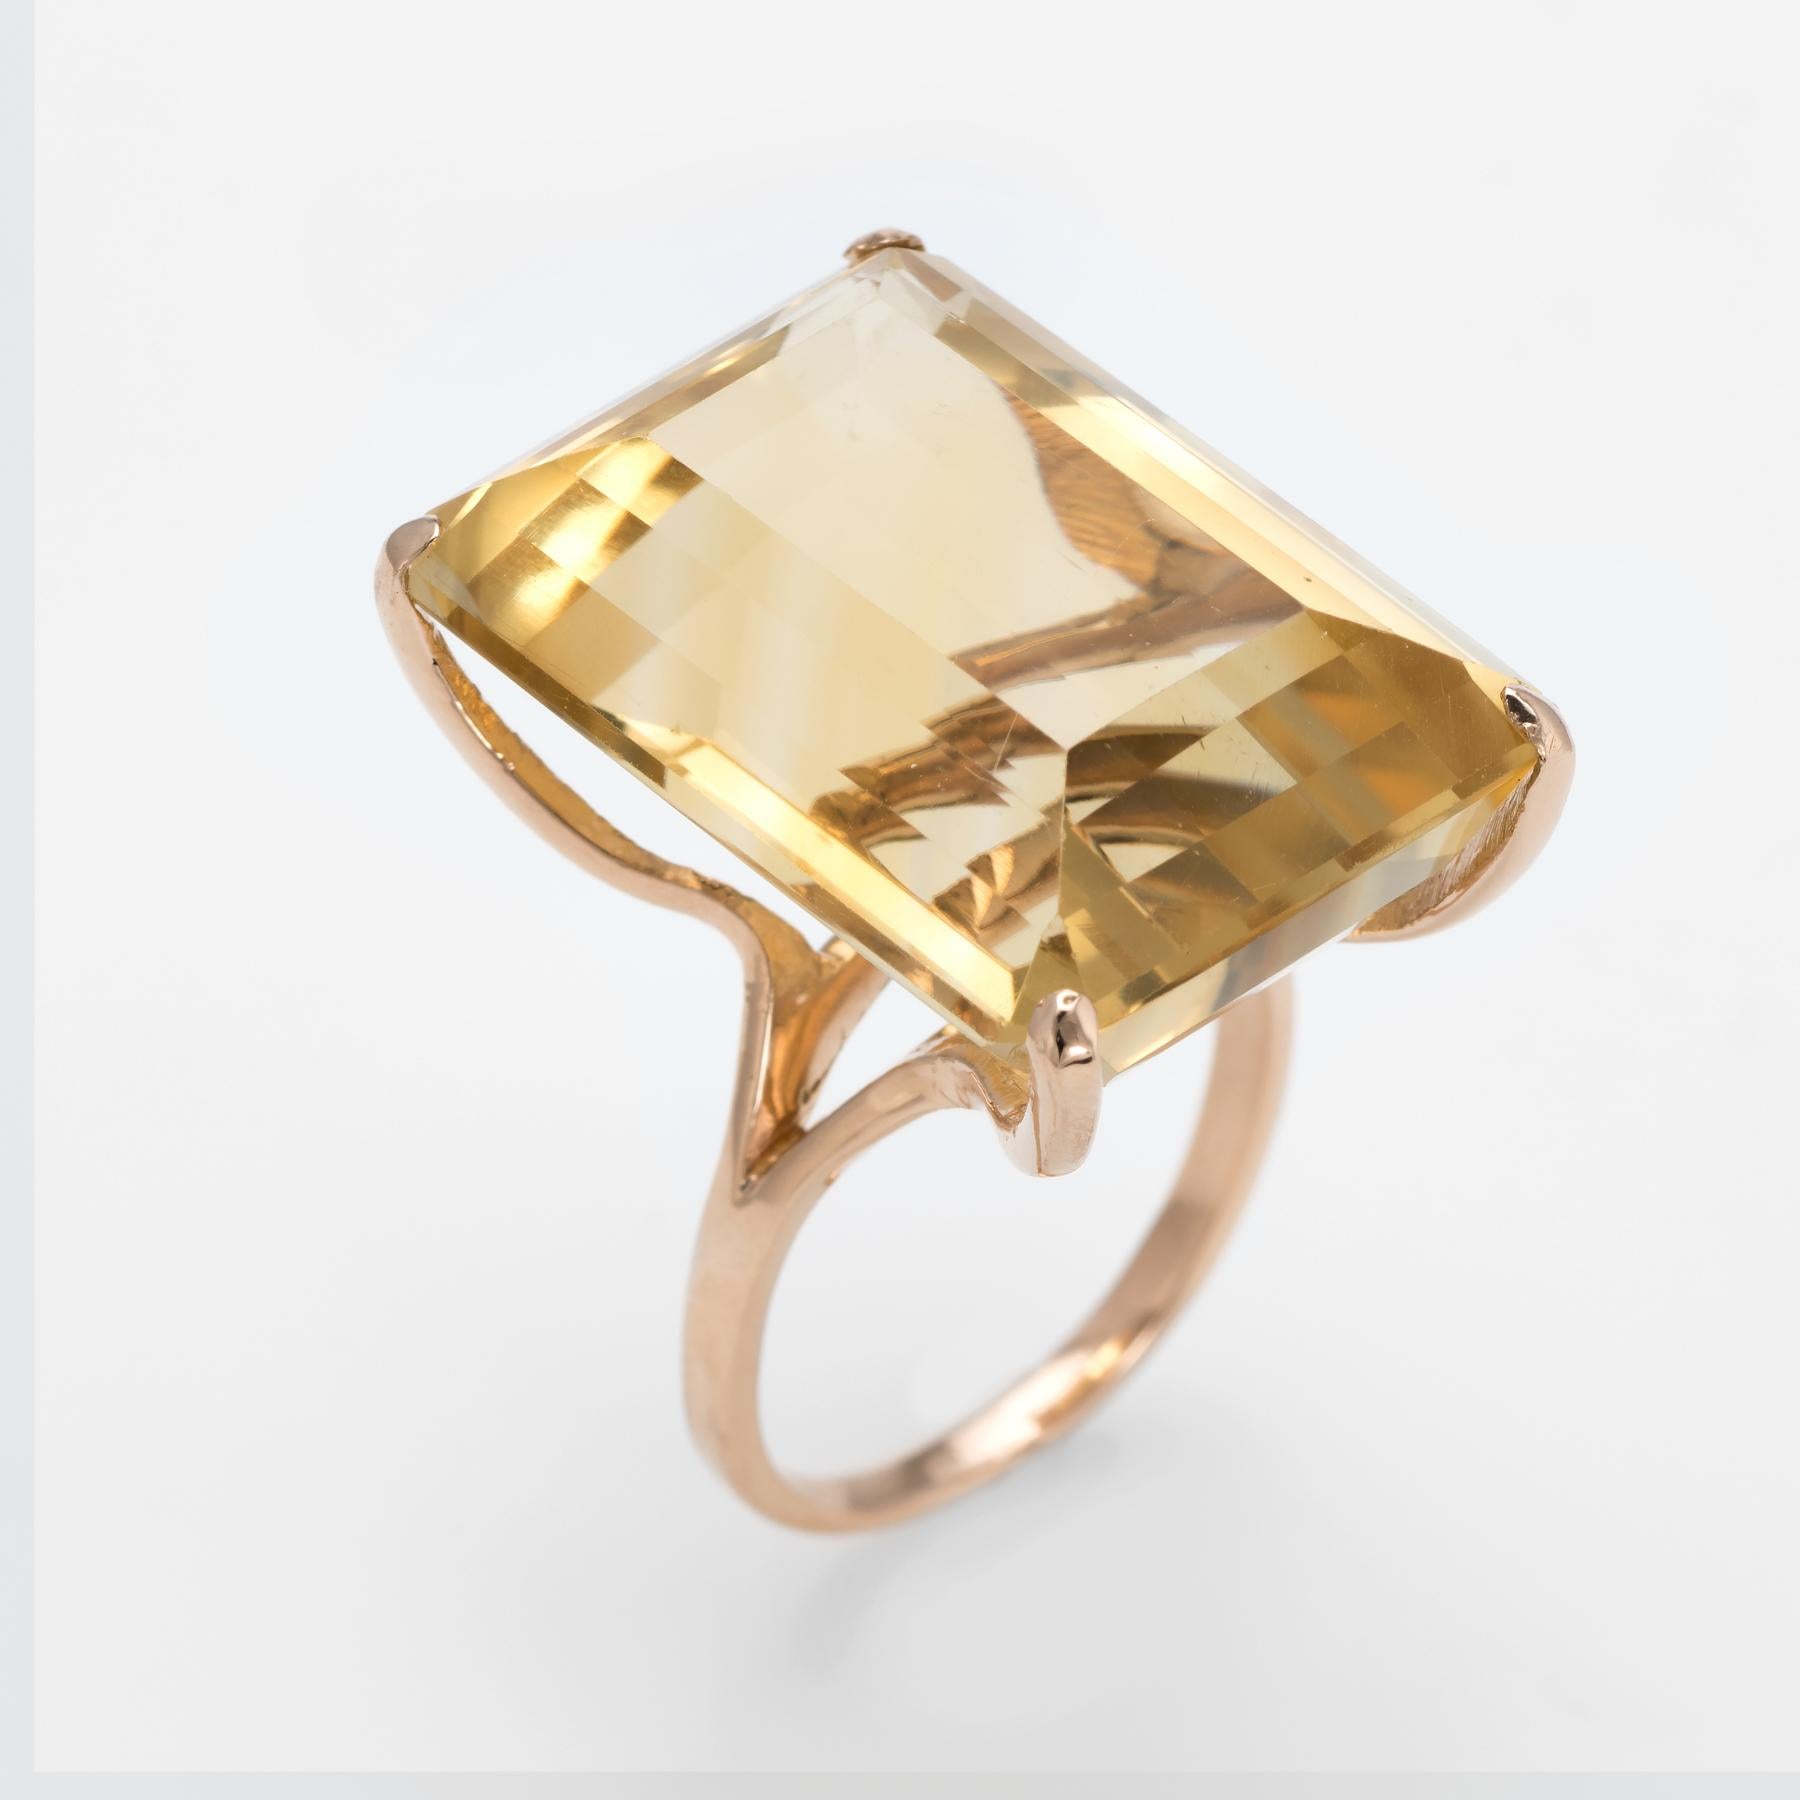 Finely detailed vintage citrine cocktail ring (circa 1960s to 1970s), crafted in 14 karat yellow gold. 

Emerald cut citrine measuring 26mm x 19mm (estimated at 45 carats) is set into the mount. The citrine is in excellent condition and free of